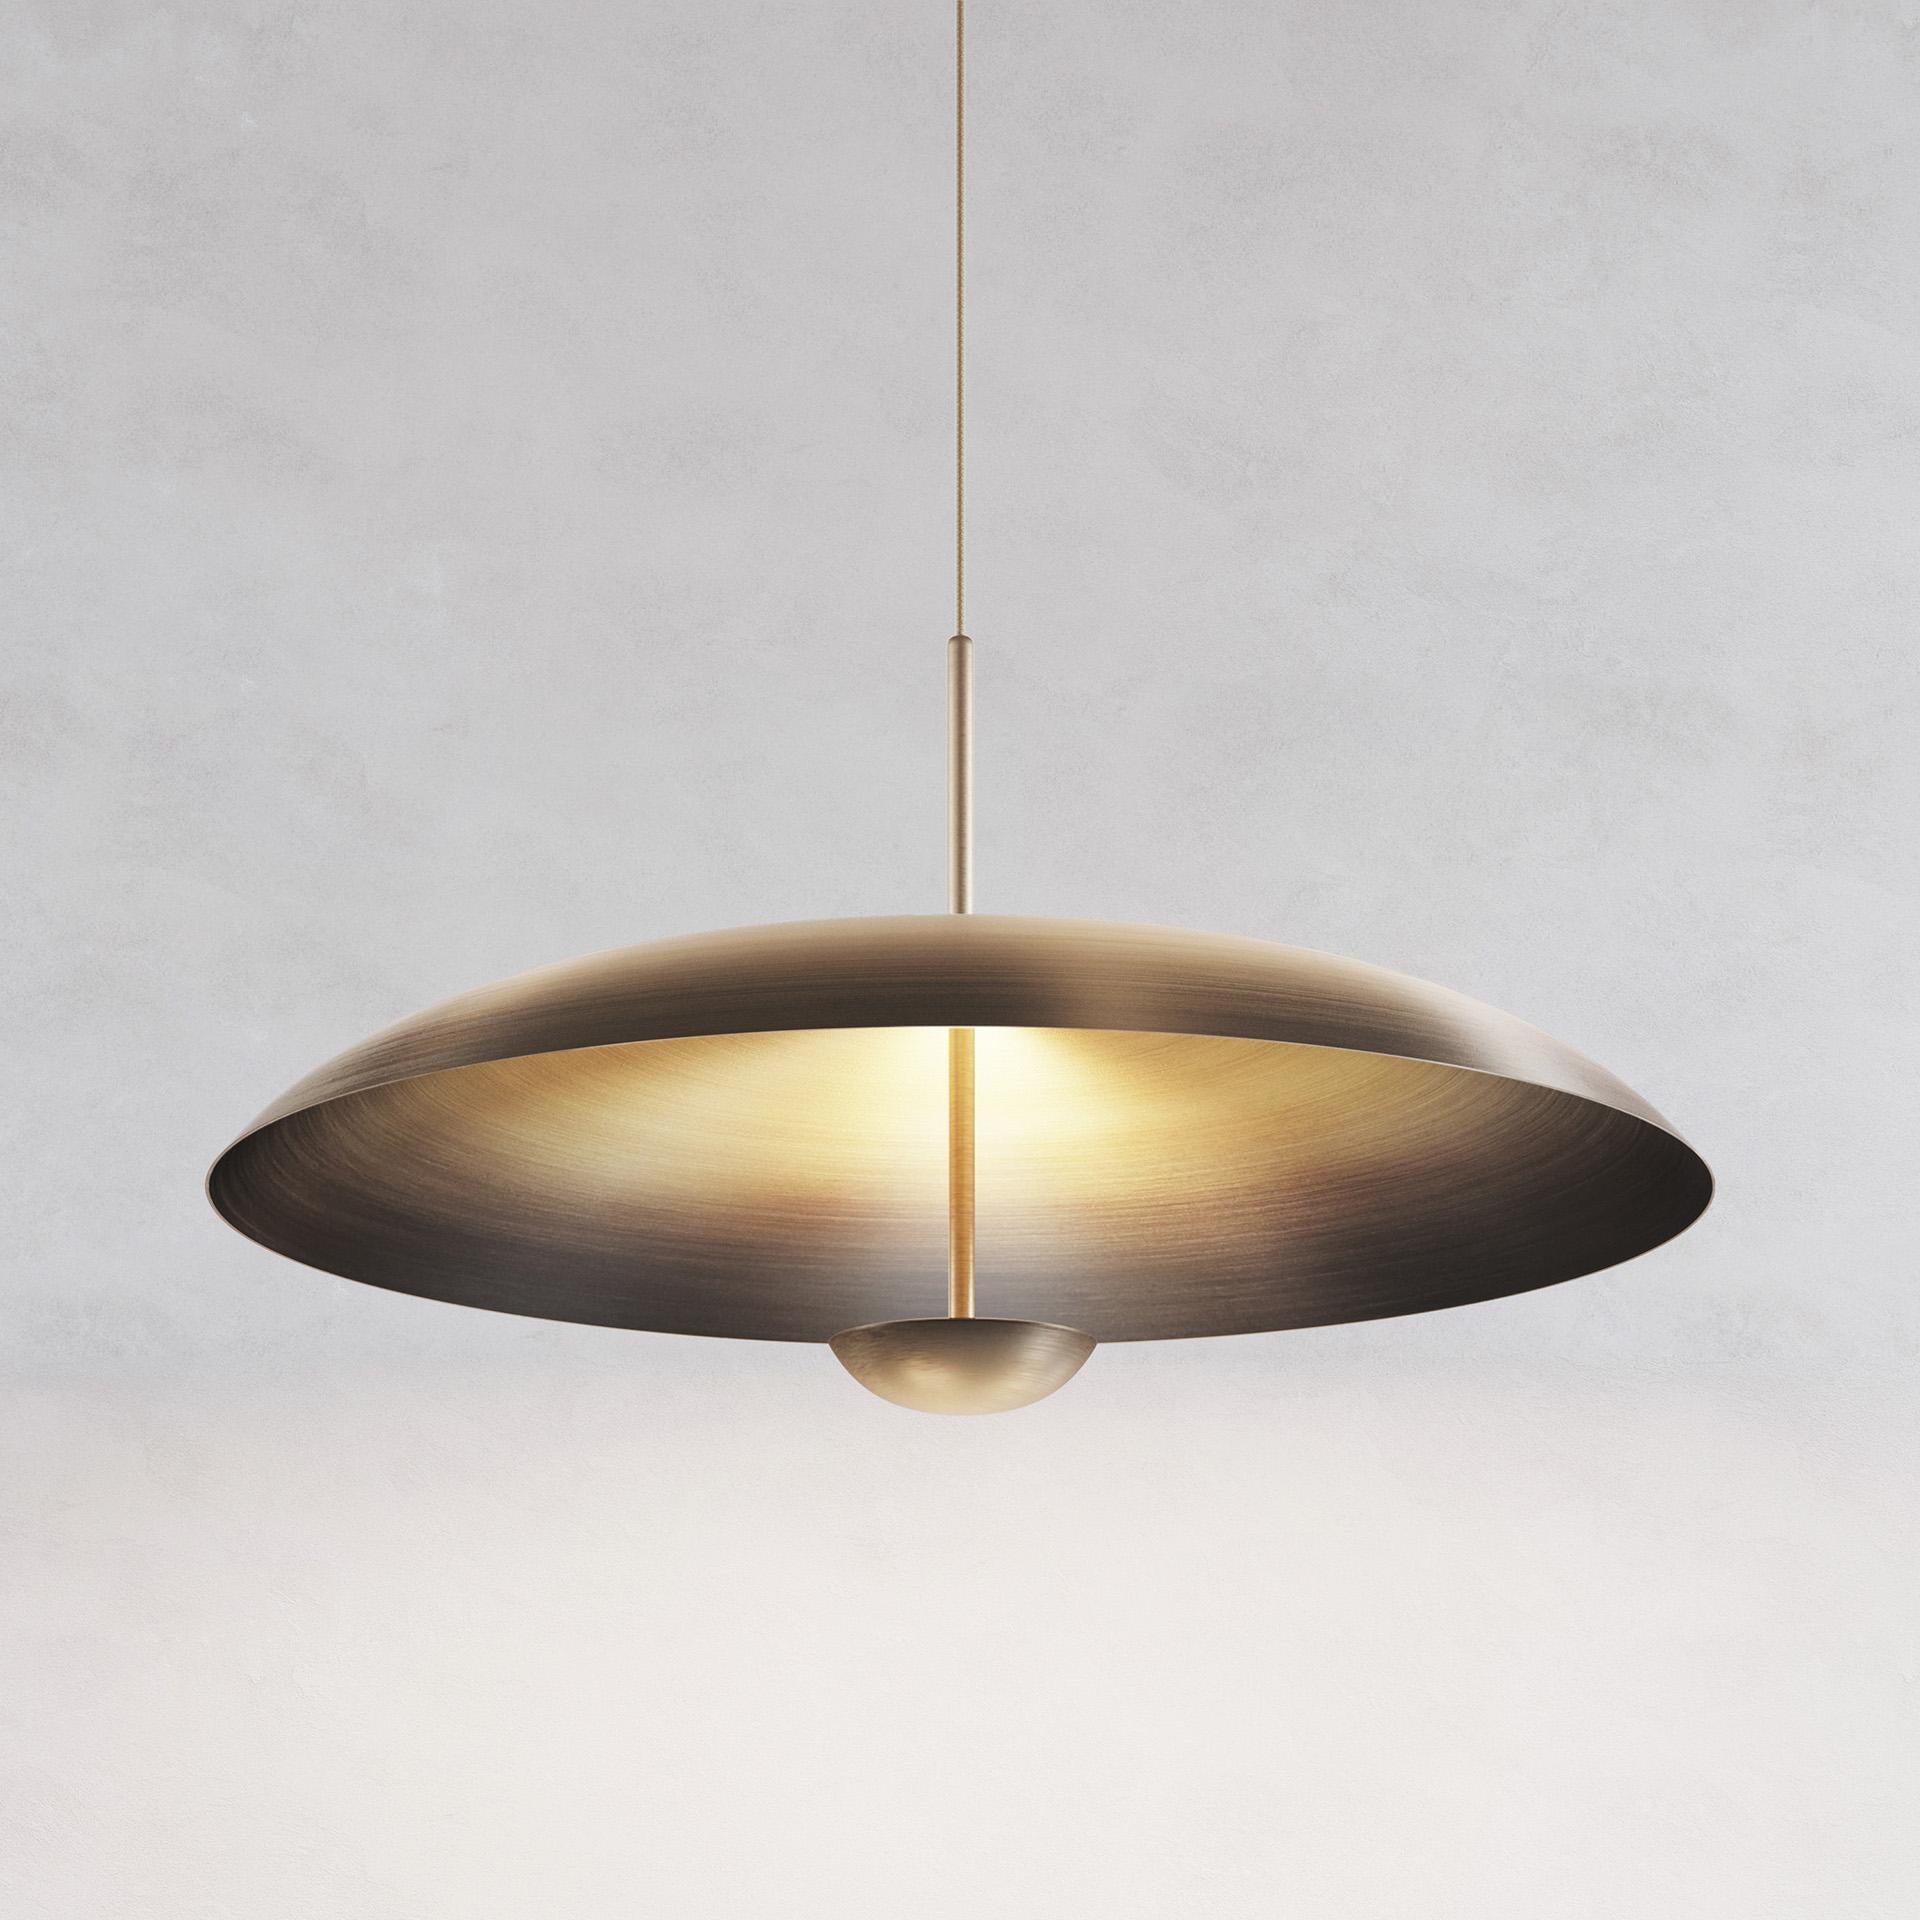 Ore Pendant 100 by Atelier001
Dimensions: D100 x H52 cm
Materials: shade Bronze gradient patinated brass
Framework satin brass
Also available: in different dimension and finishes. 

All our lamps can be wired according to each country. If sold to